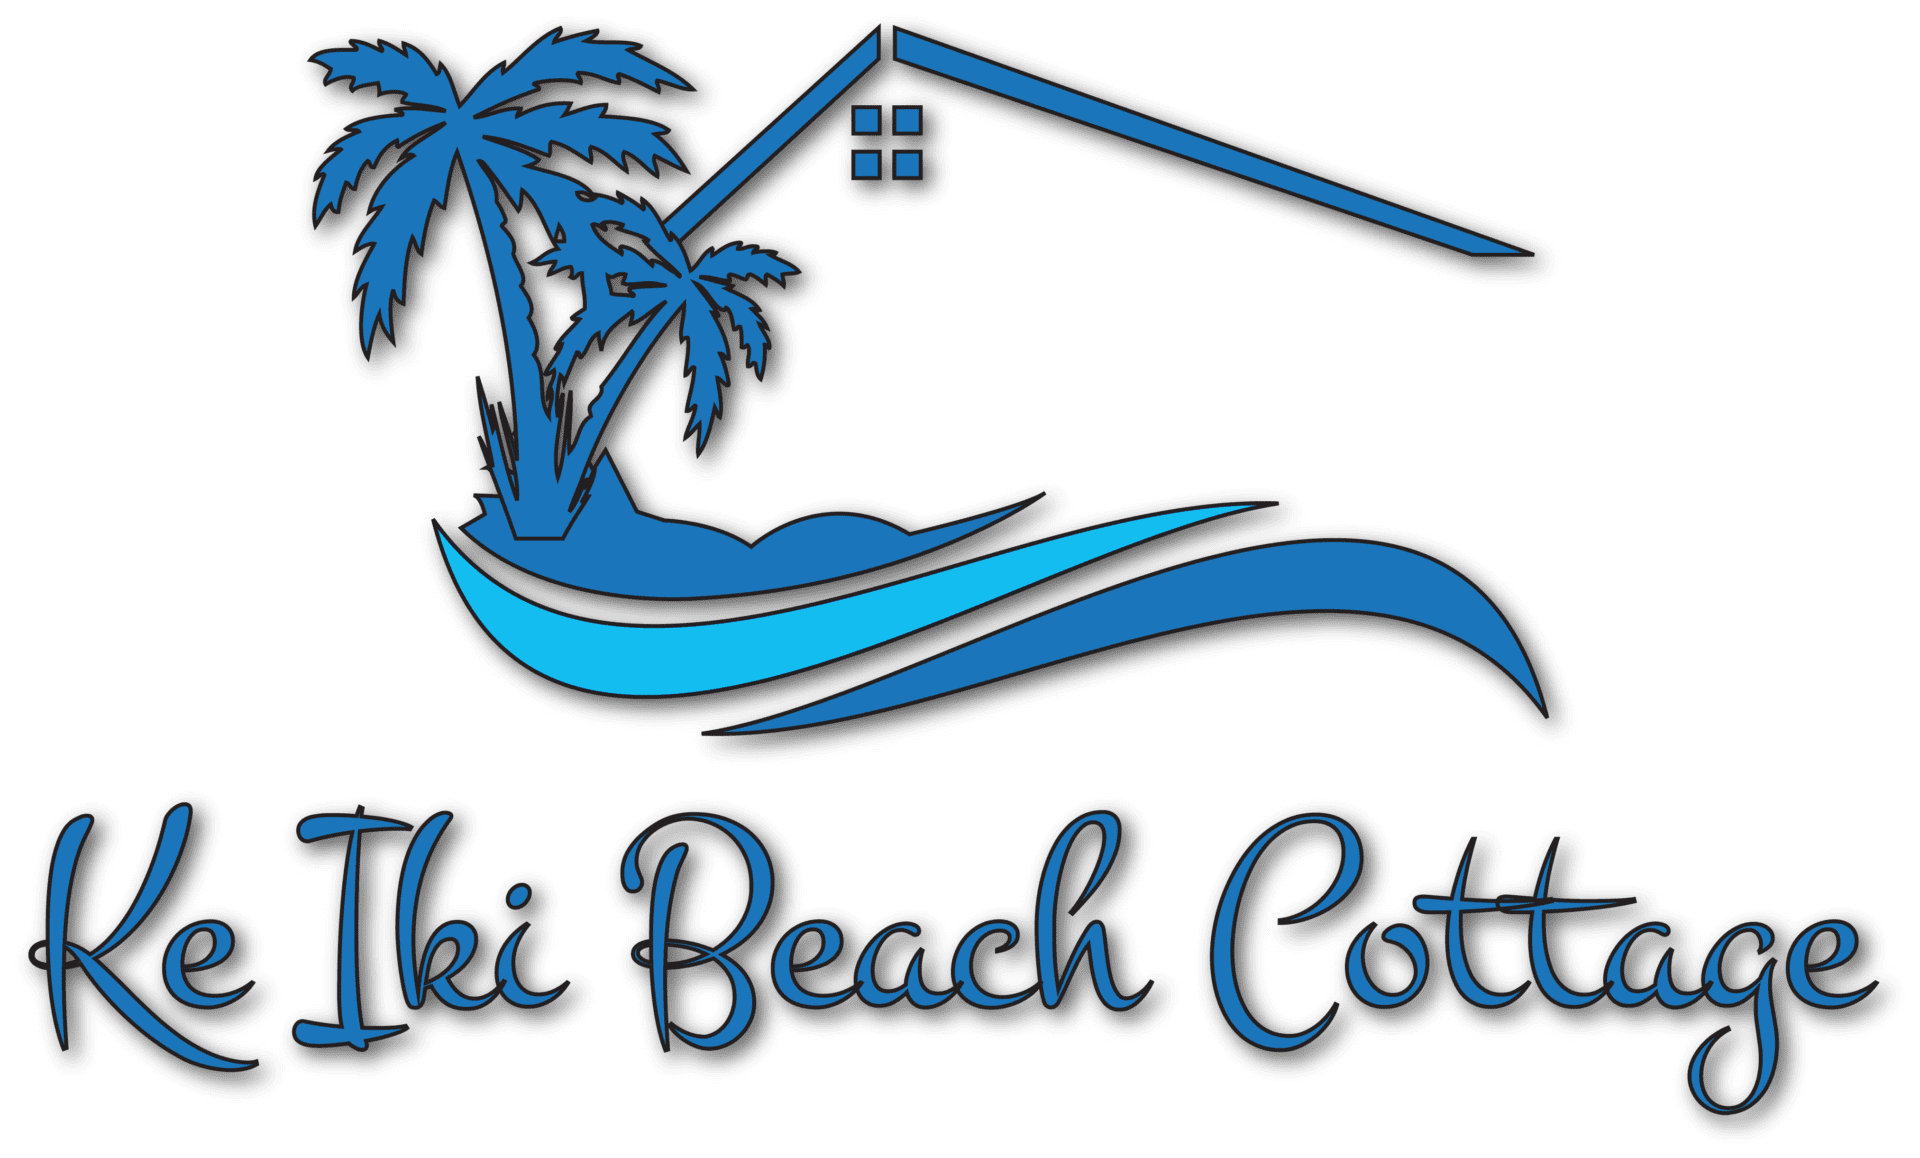 A blue and black logo for tiki beach cottage.